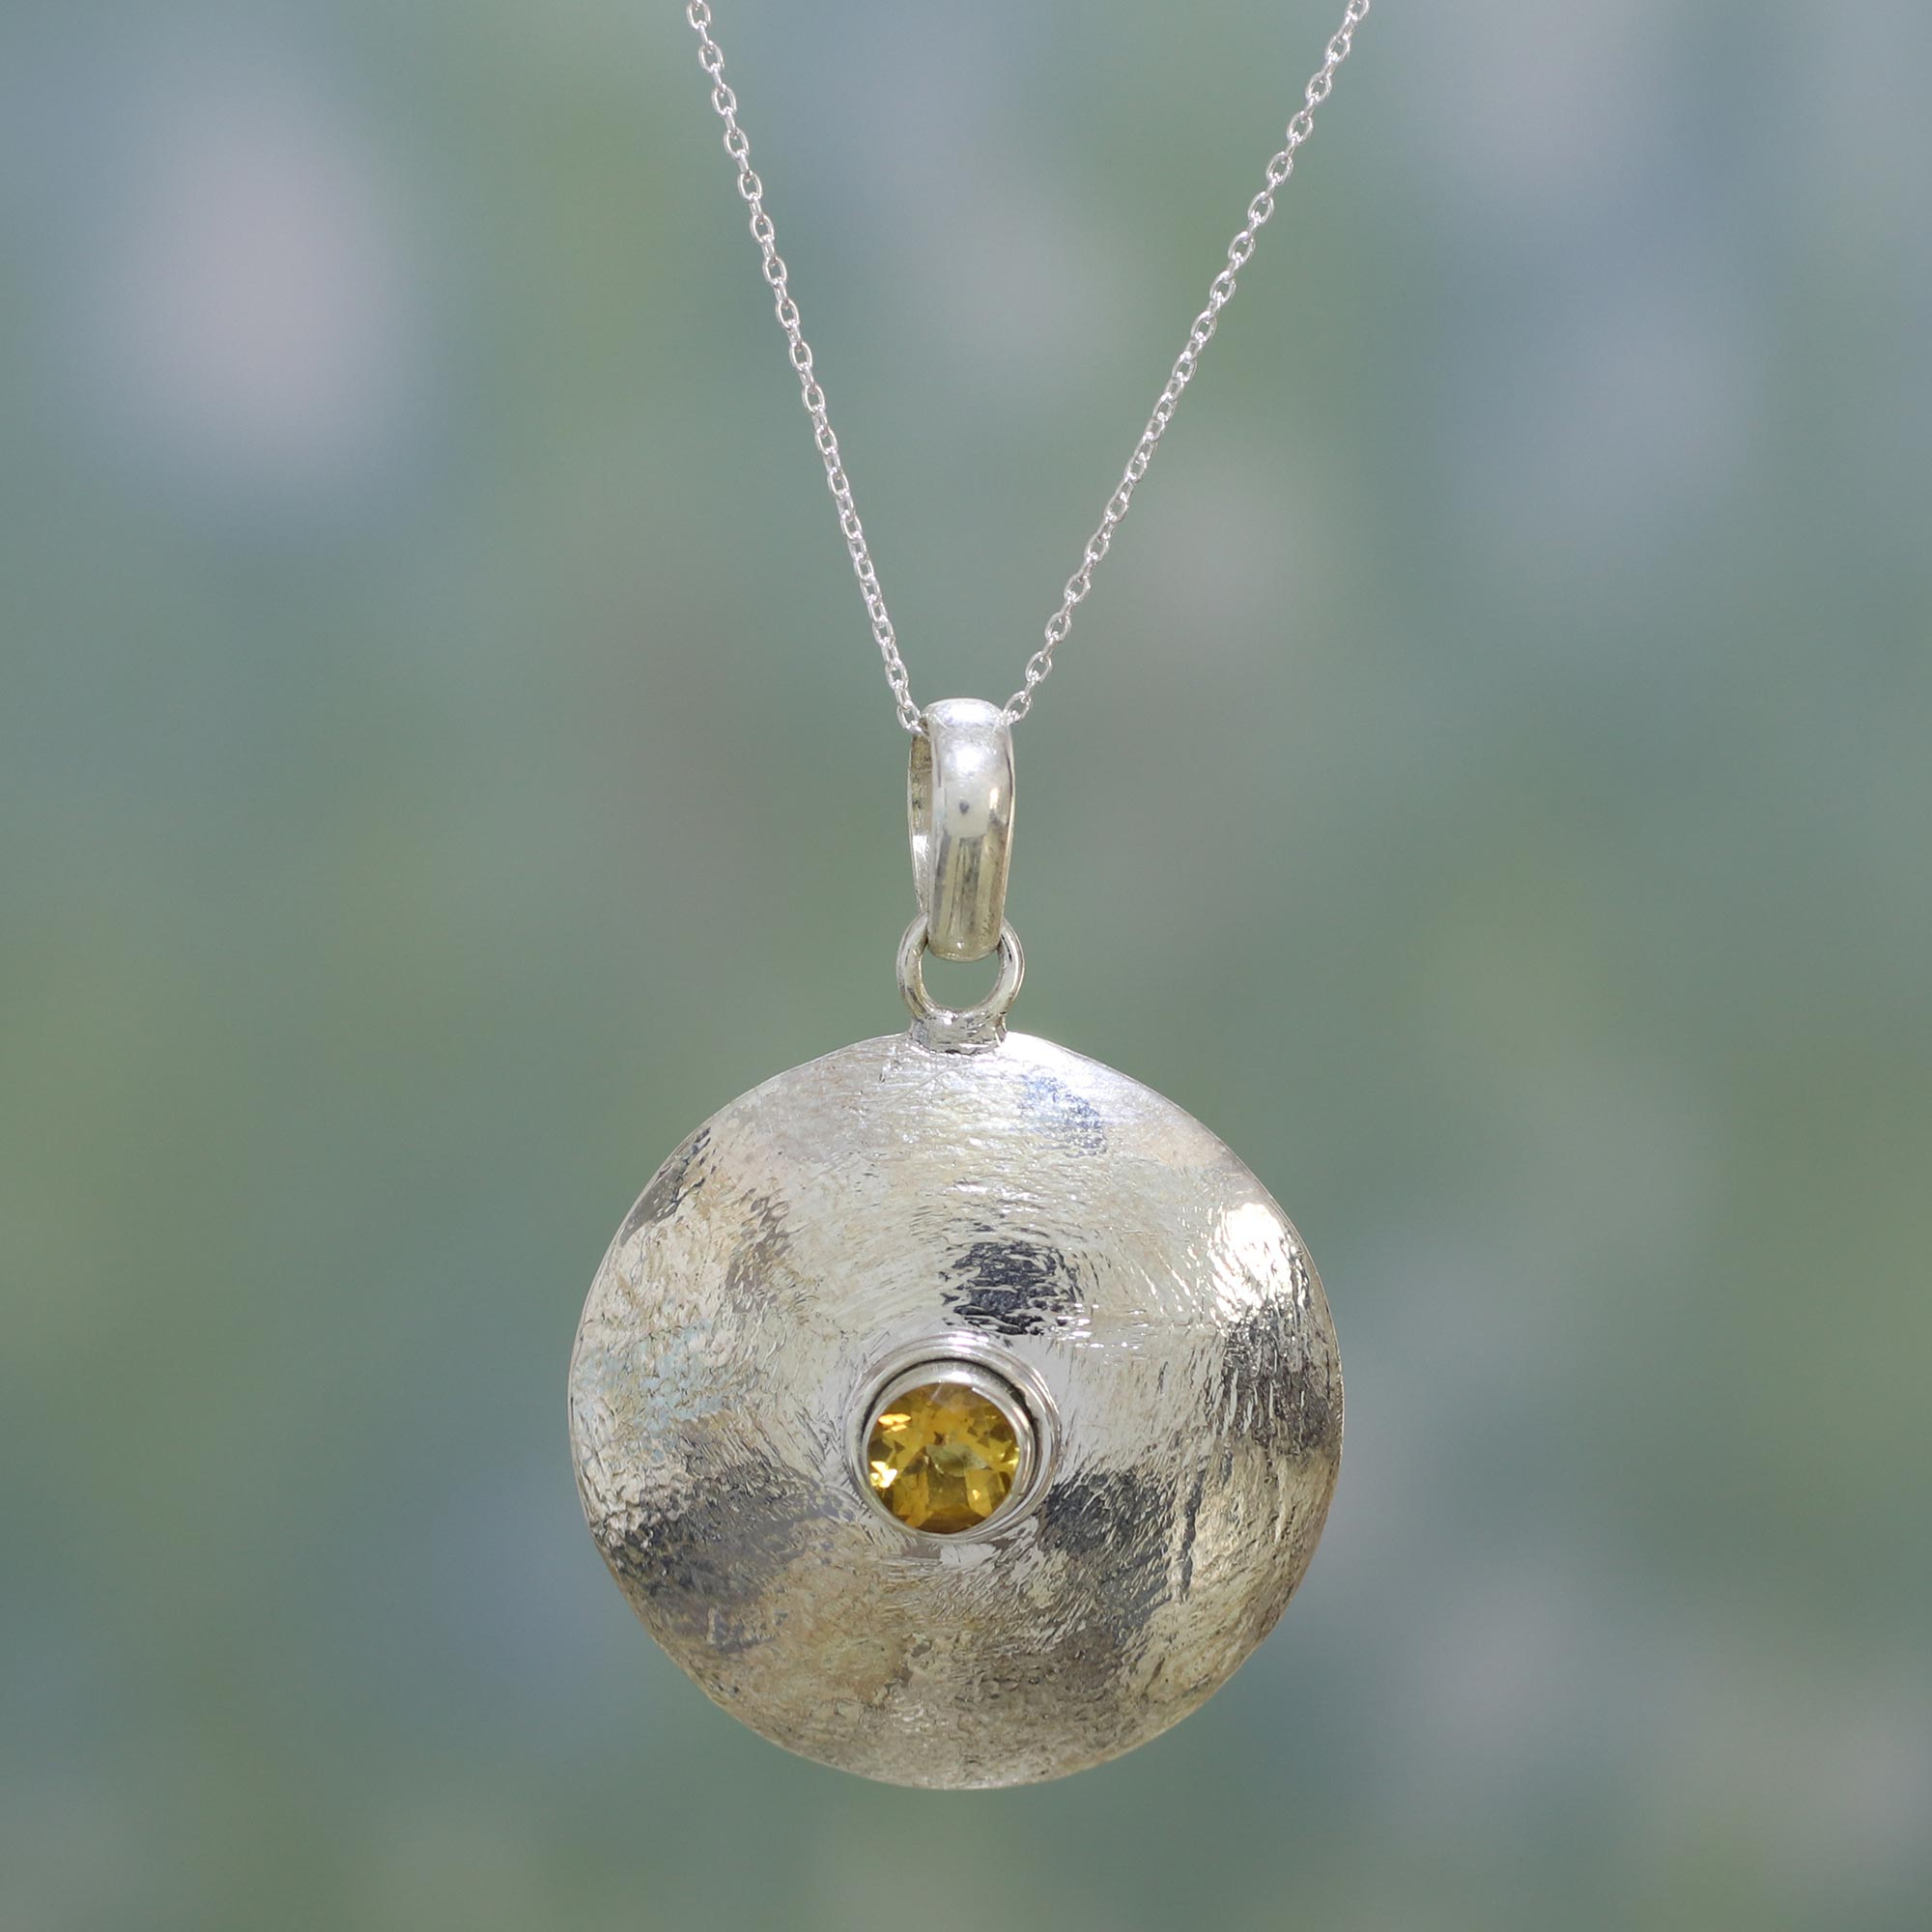 UNICEF Market | Hand Made Citrine and Silver Pendant Necklace - Intensity